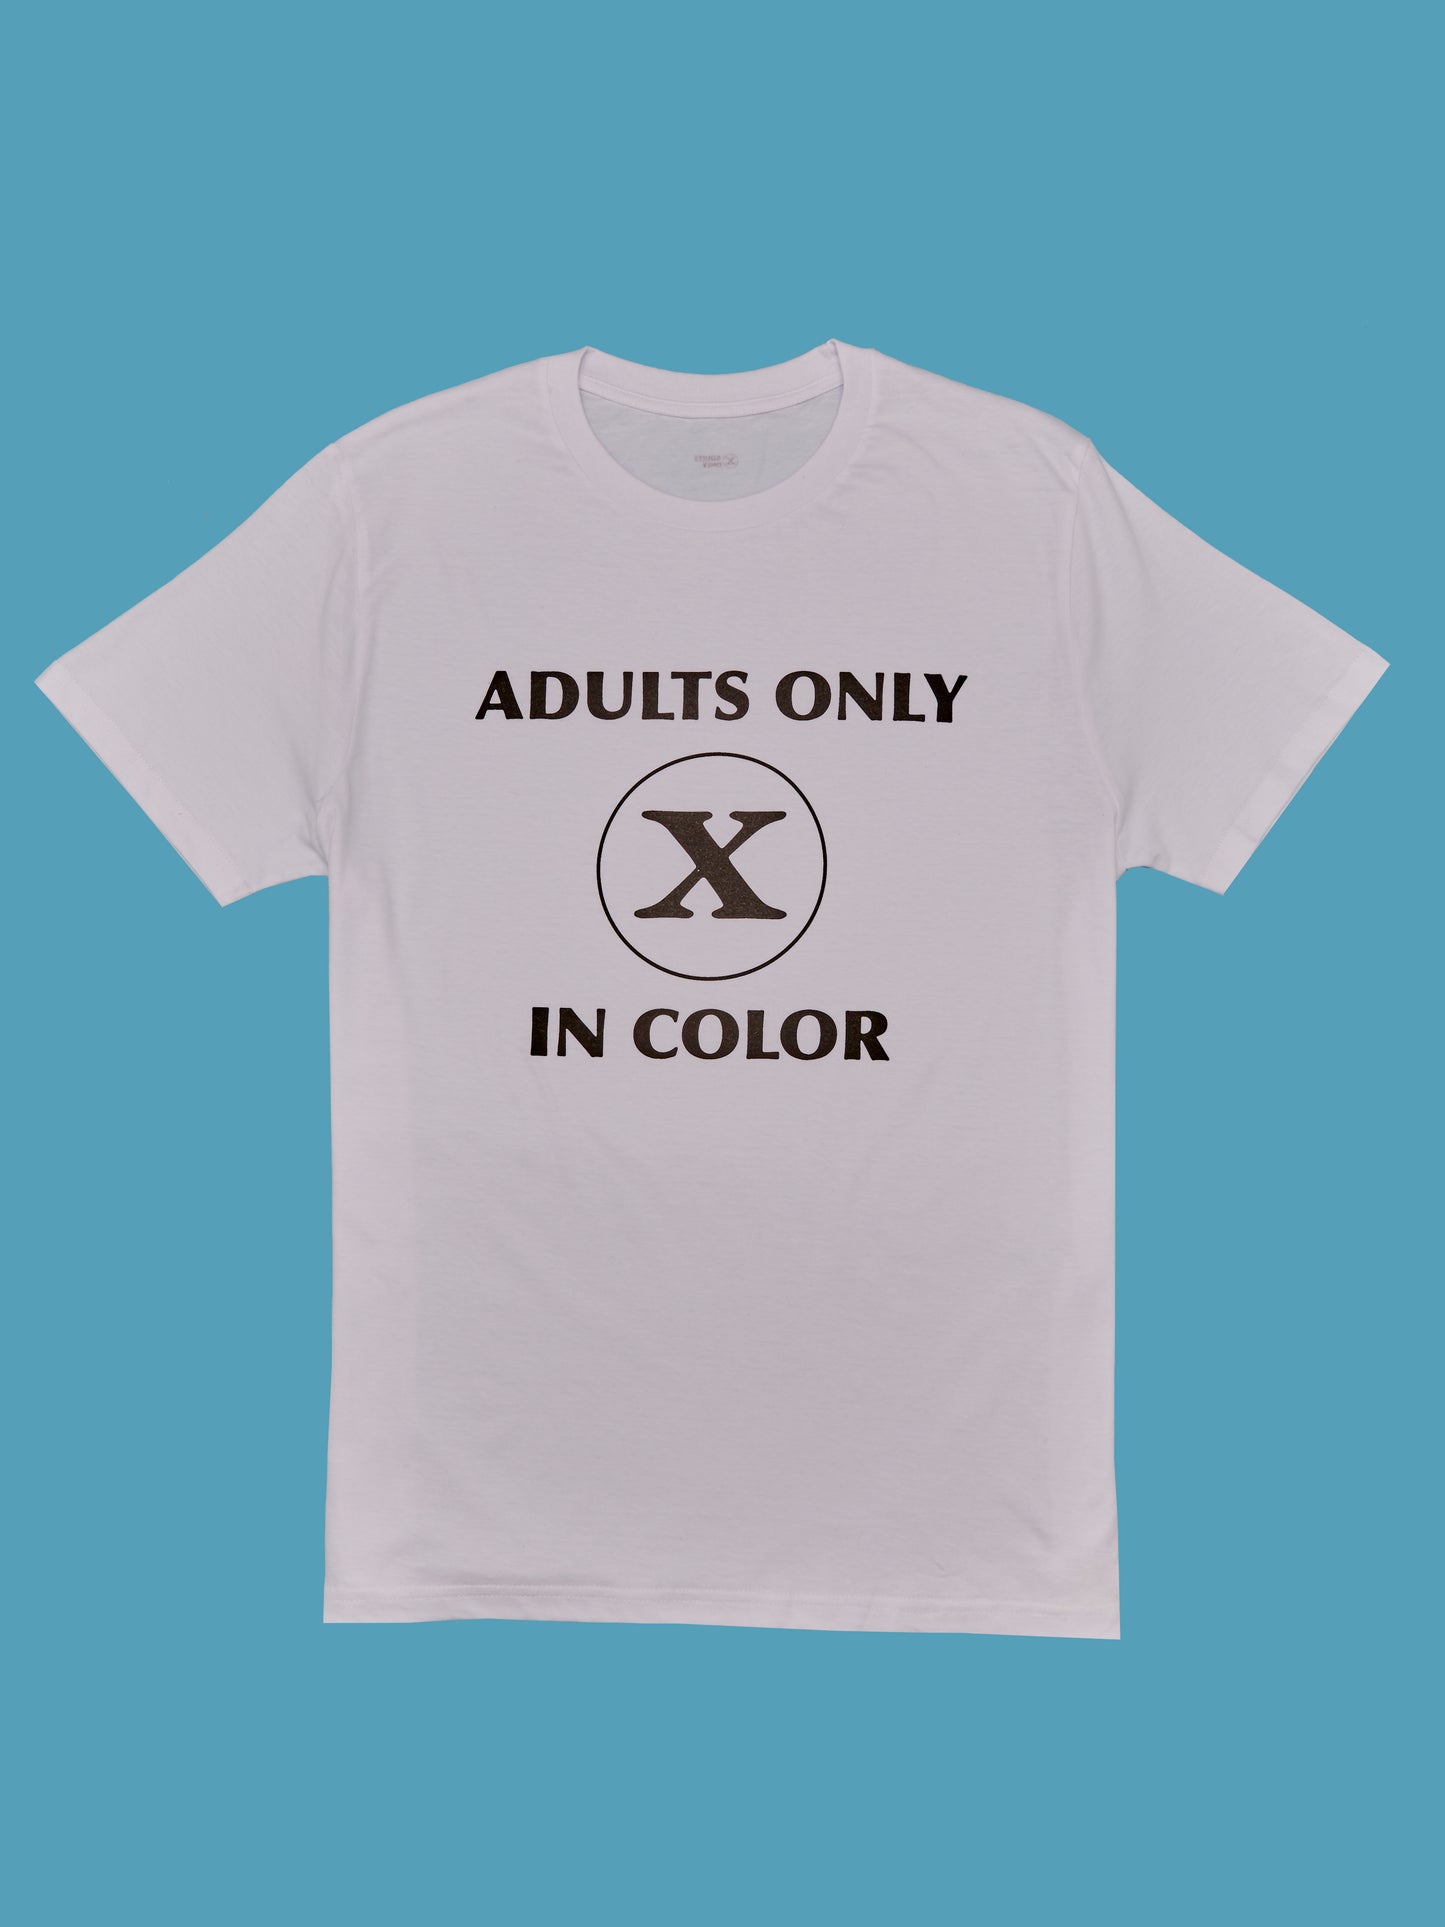 ADULTS ONLY IN COLOR